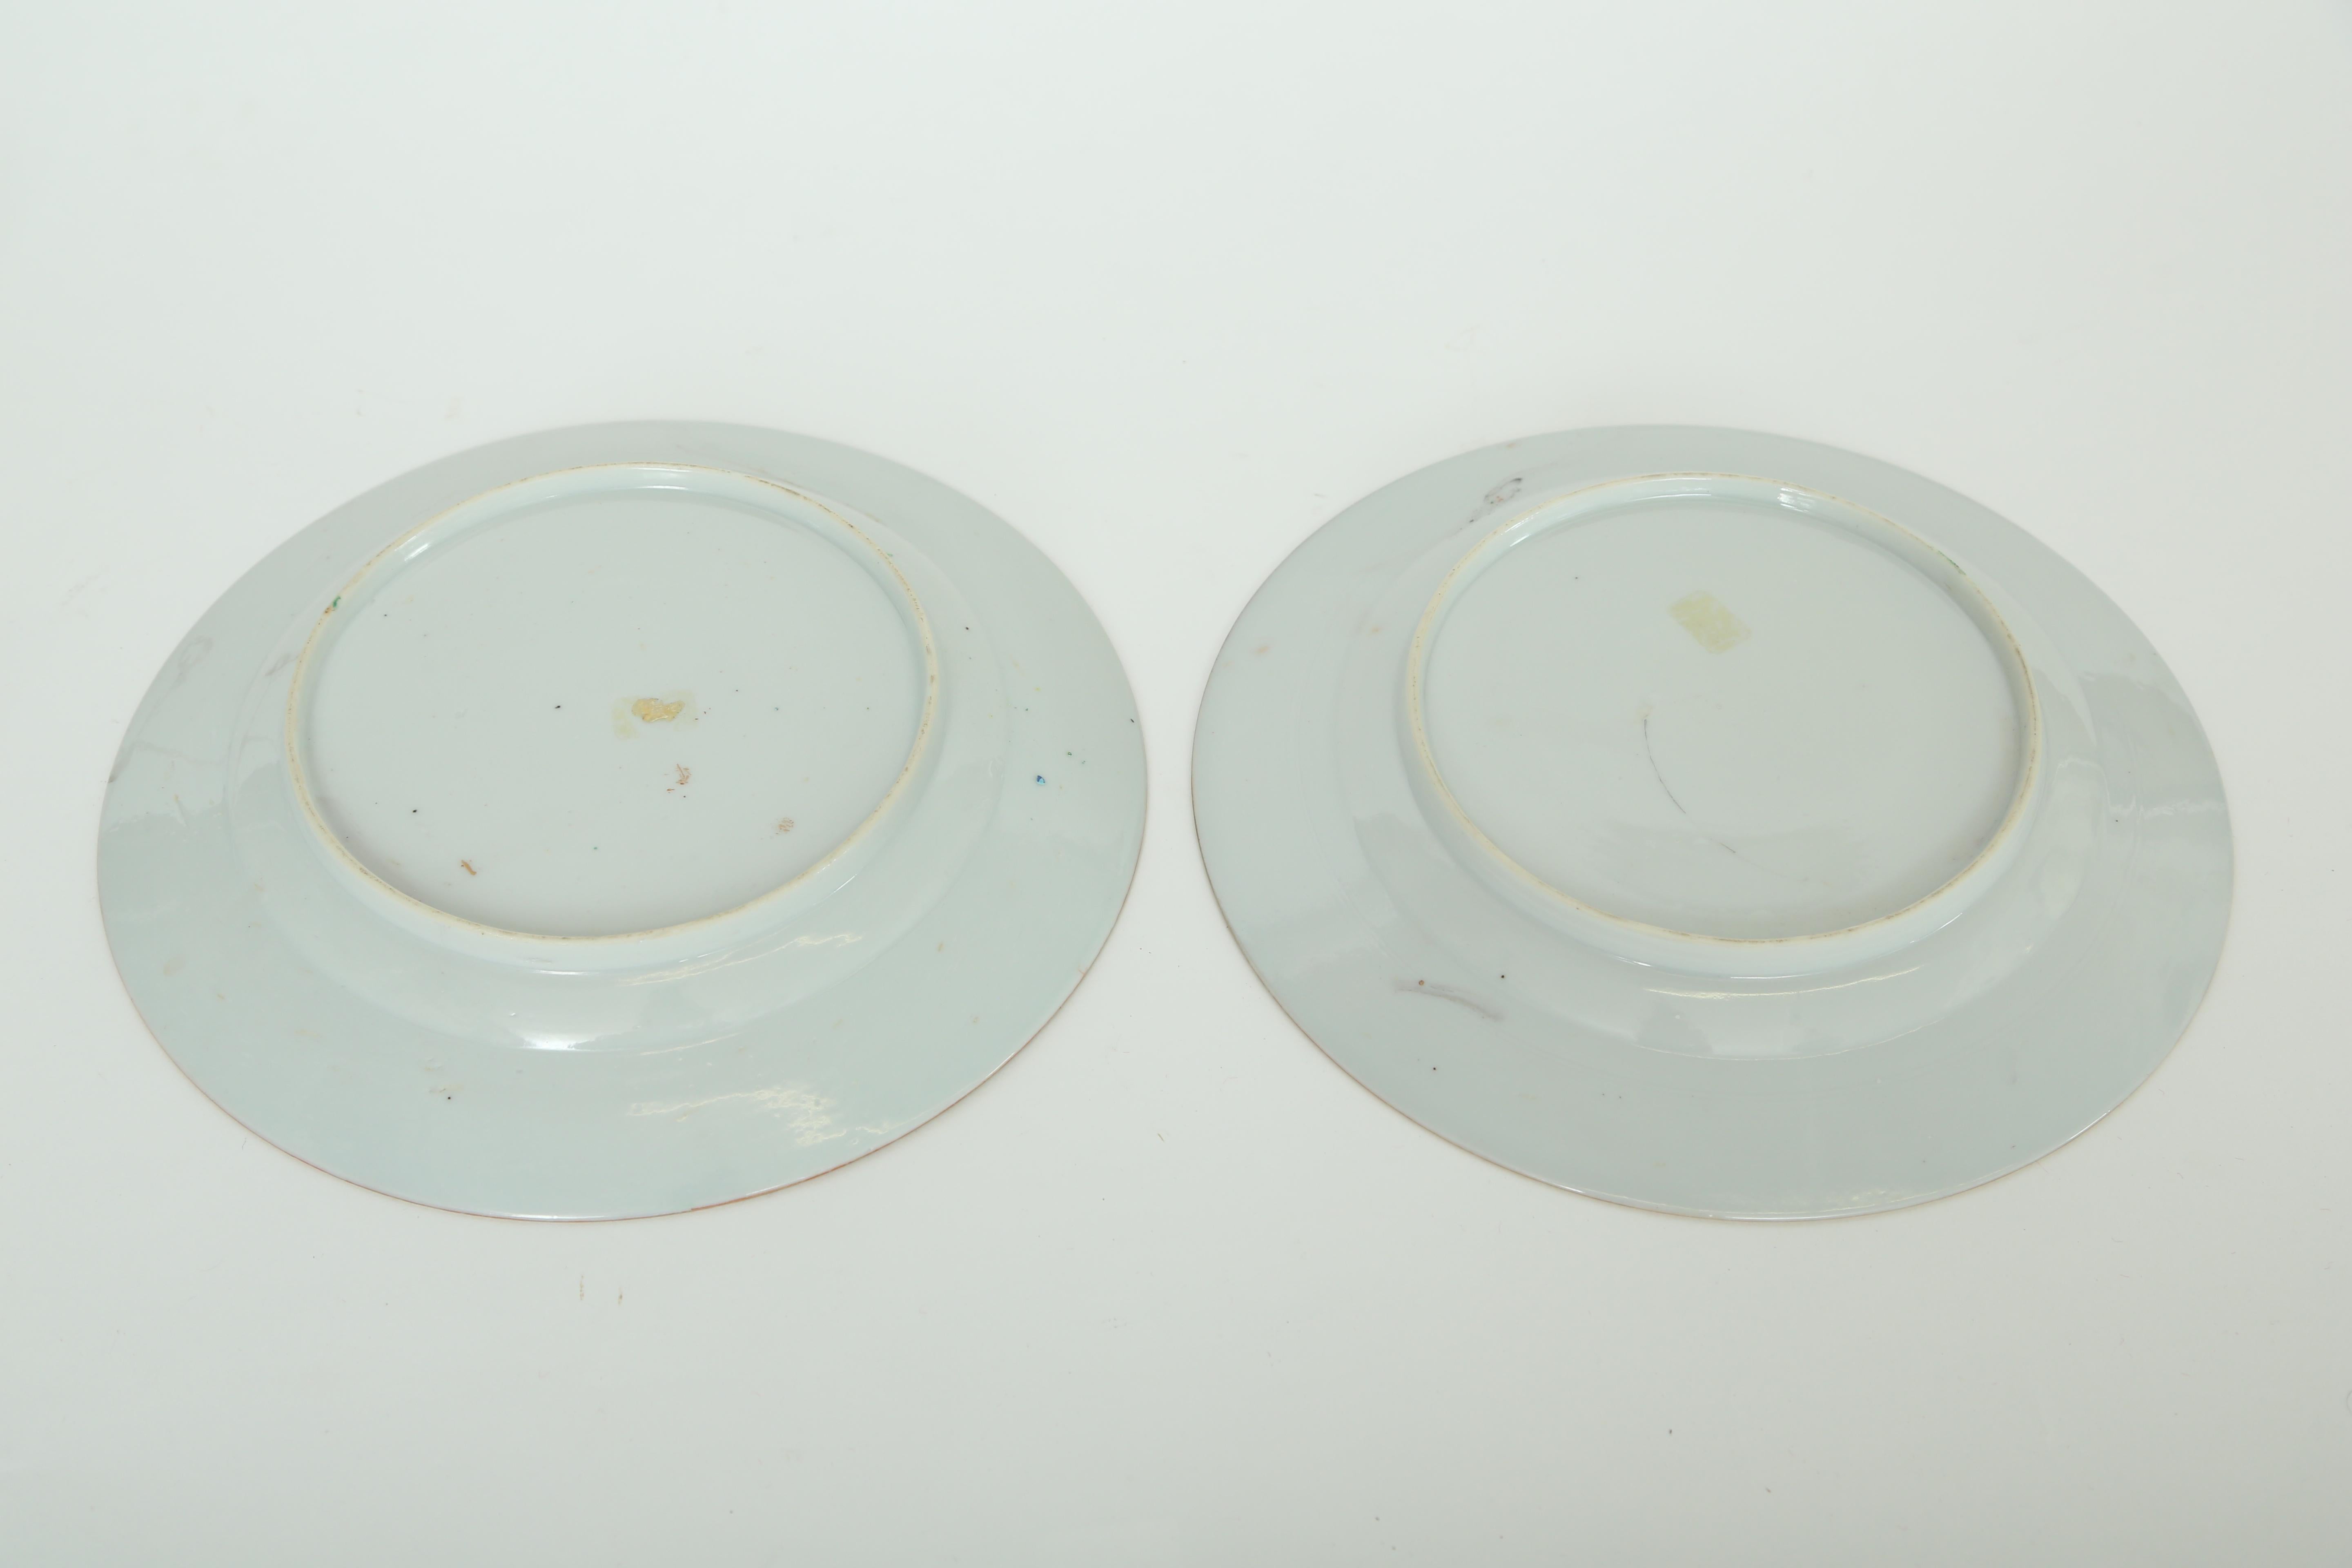 Early 20th Century Pair of Chinese Export Porcelain Plates in the Cabbage and Butterfly Pattern